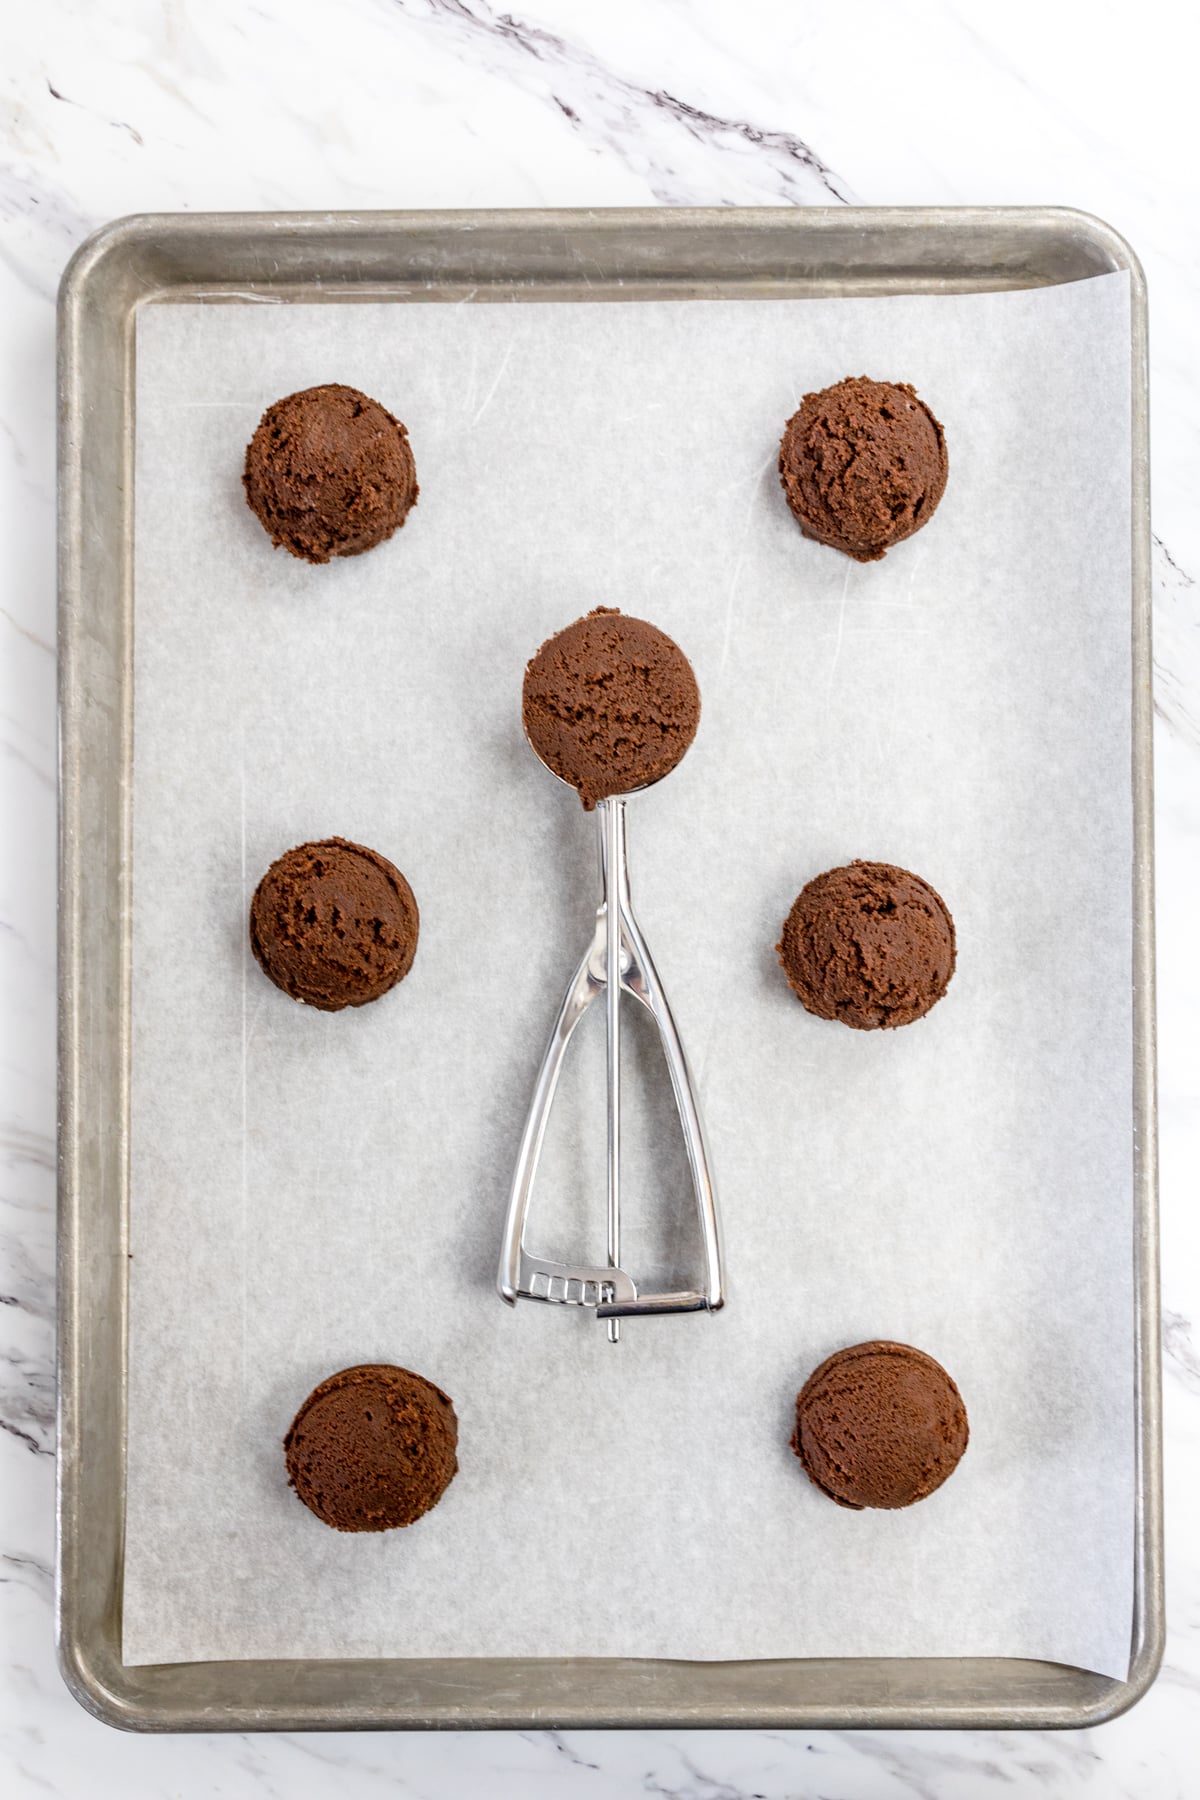 Top view of a baking tray lined with parchment paper with chocolate cookie dough balls on it, and a cookie scoop lying face up with a chocolate cookie scoop in it.